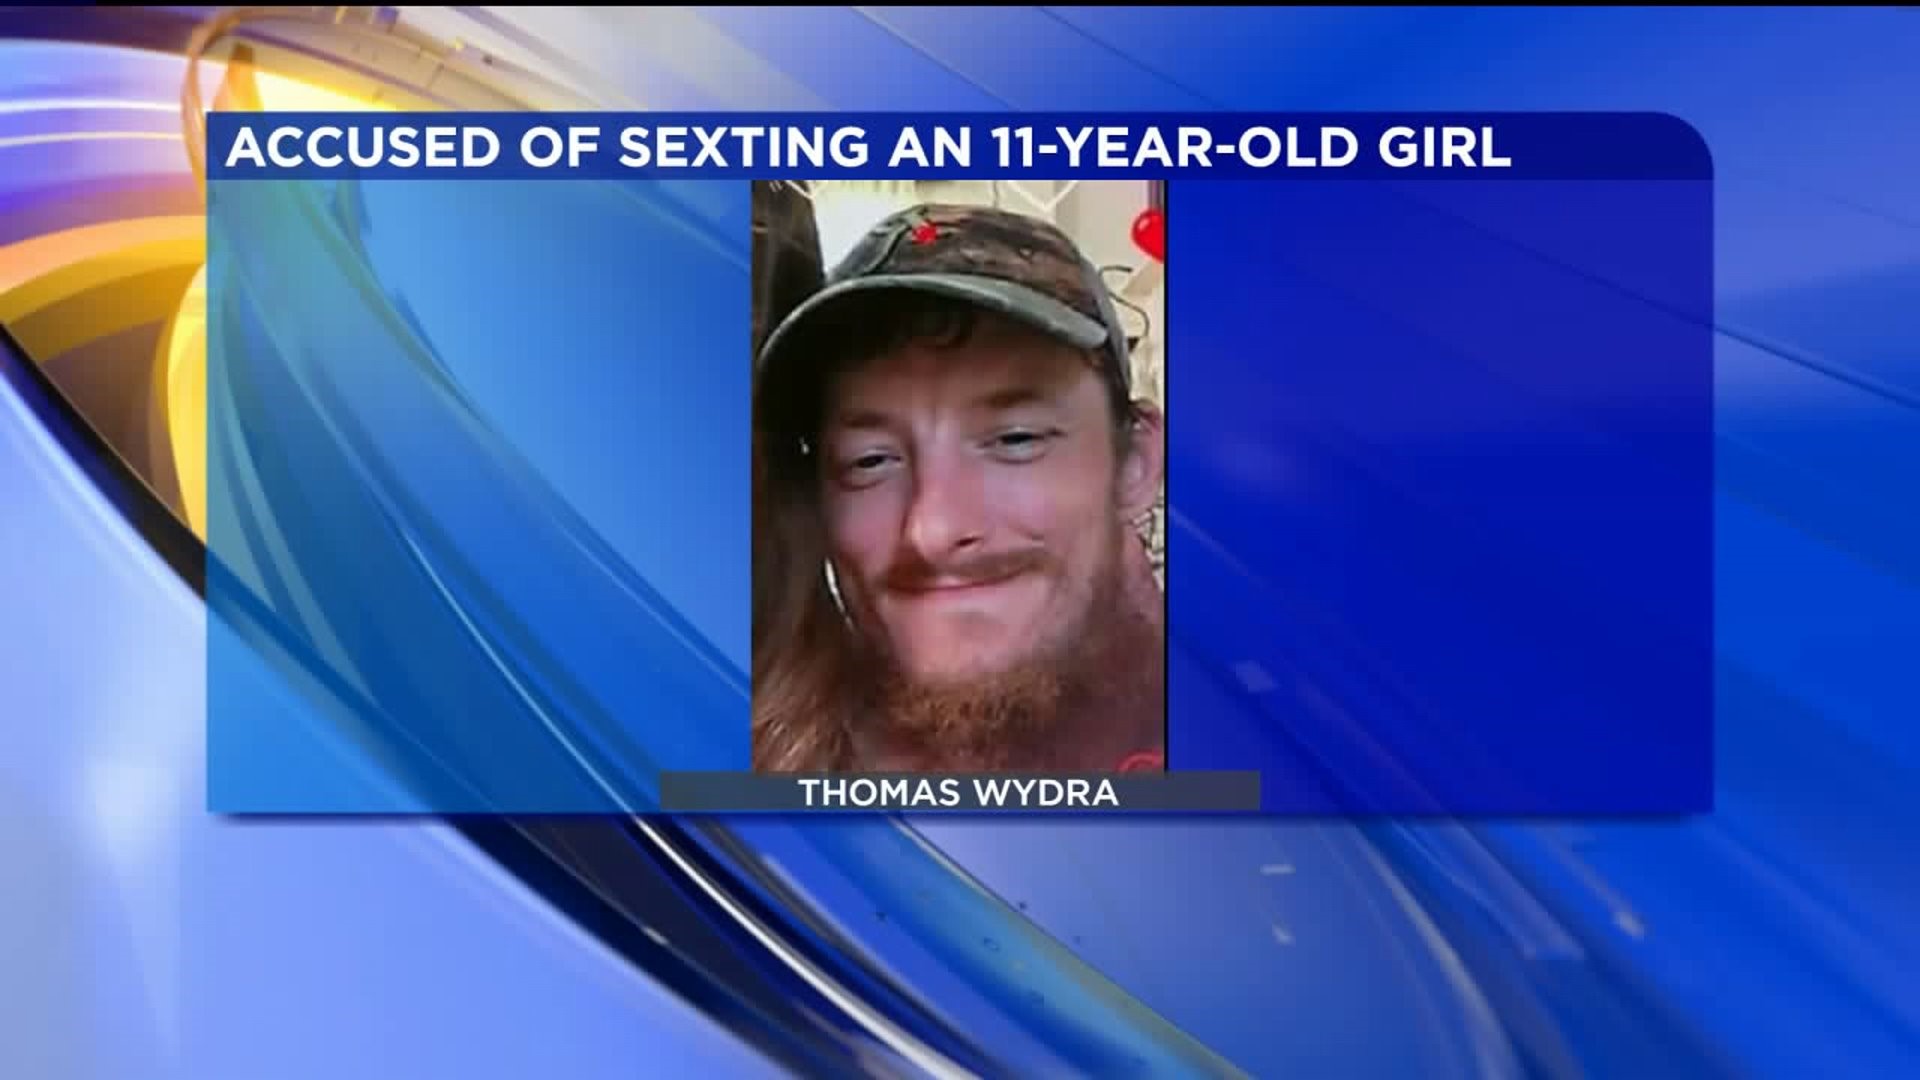 Man Accused of Exchanging Nude Photos with 11-year-old Girl